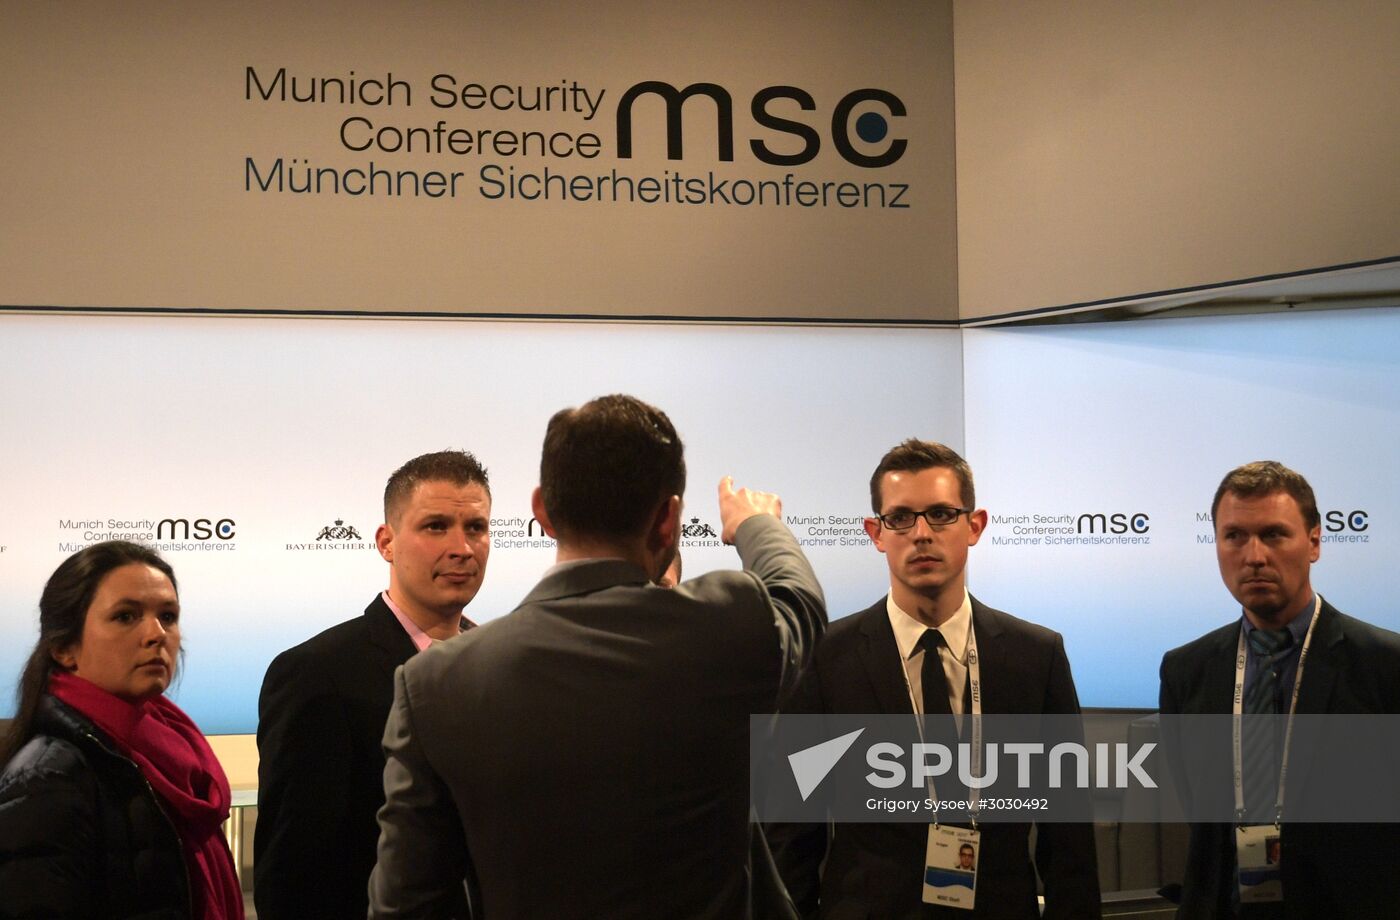 Preparations for Munich Security Conference